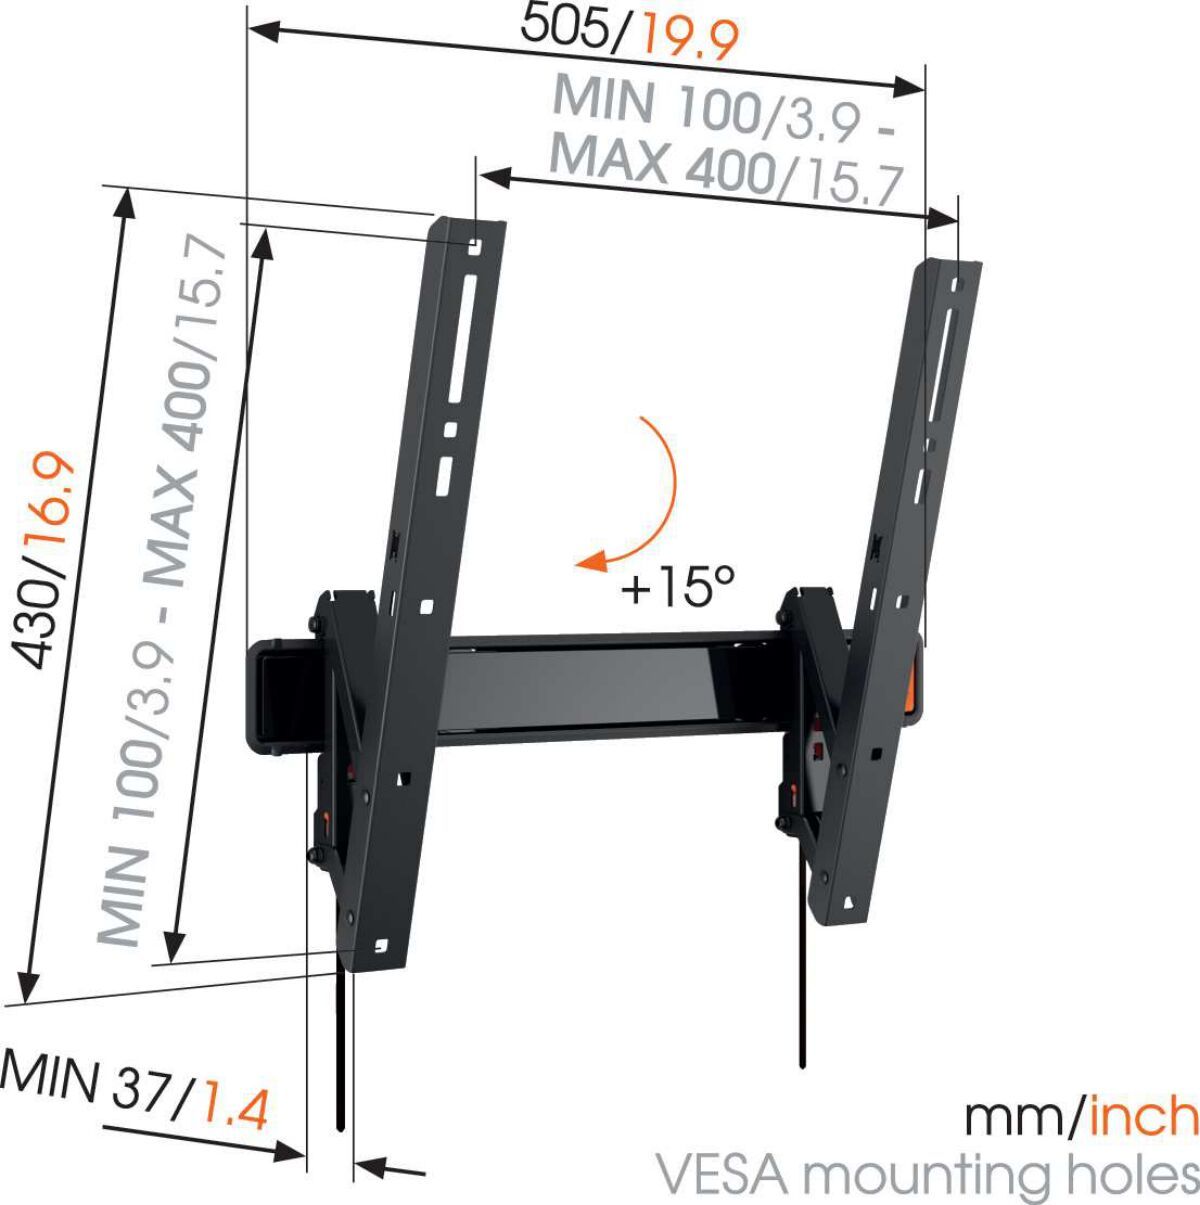 Vogel's WALL 3215 Tilting TV Wall Mount - Suitable for 32 up to 55 inch TVs up to Tilt up to 15° - Dimensions